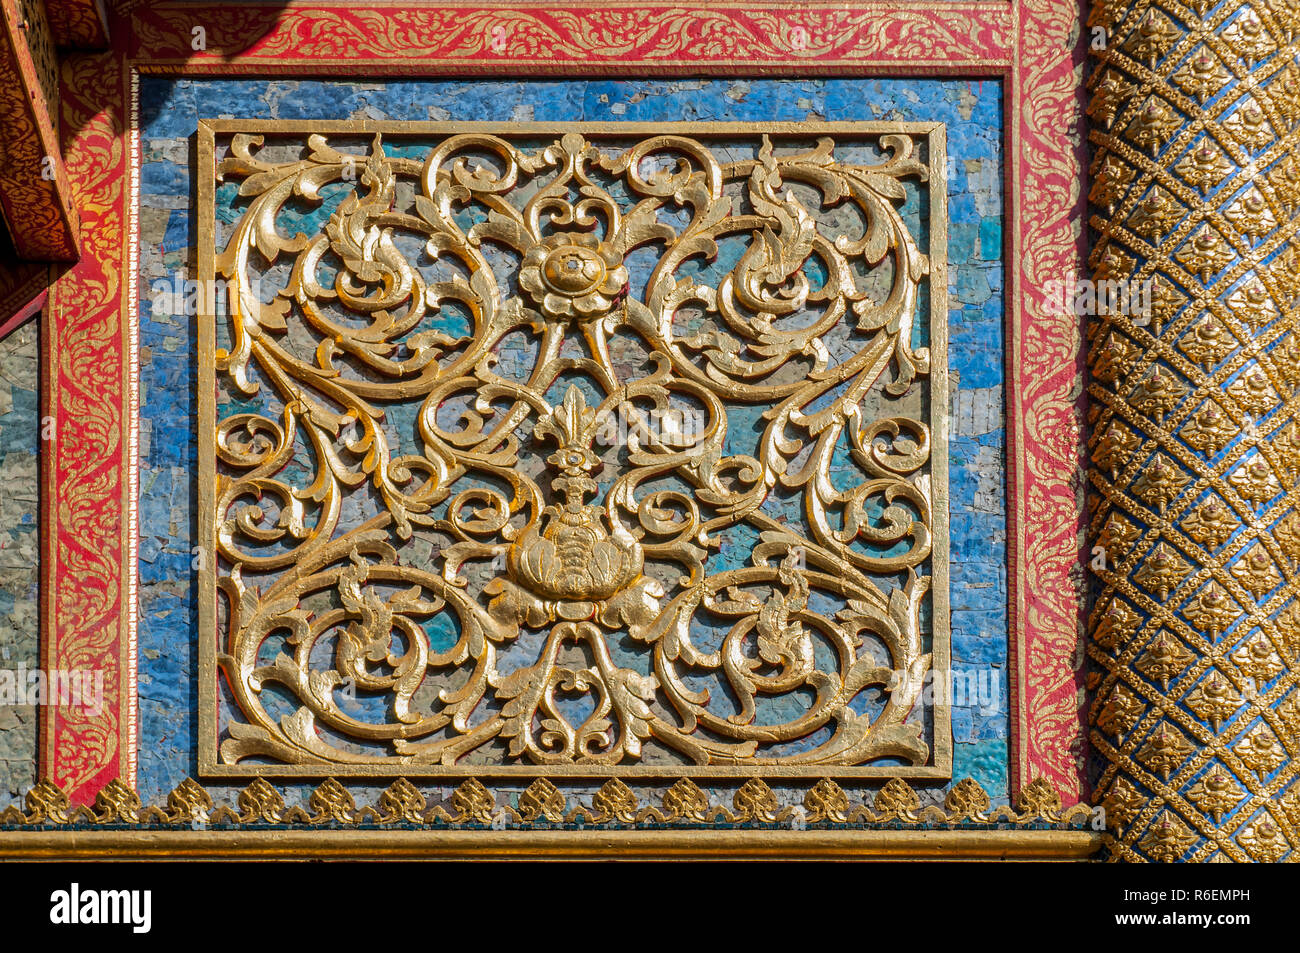 Carved Woodwork Above Entrance To Wihaan (Ordination Hall), Wat Phra Singh, Chiang Mai, Thailand Stock Photo